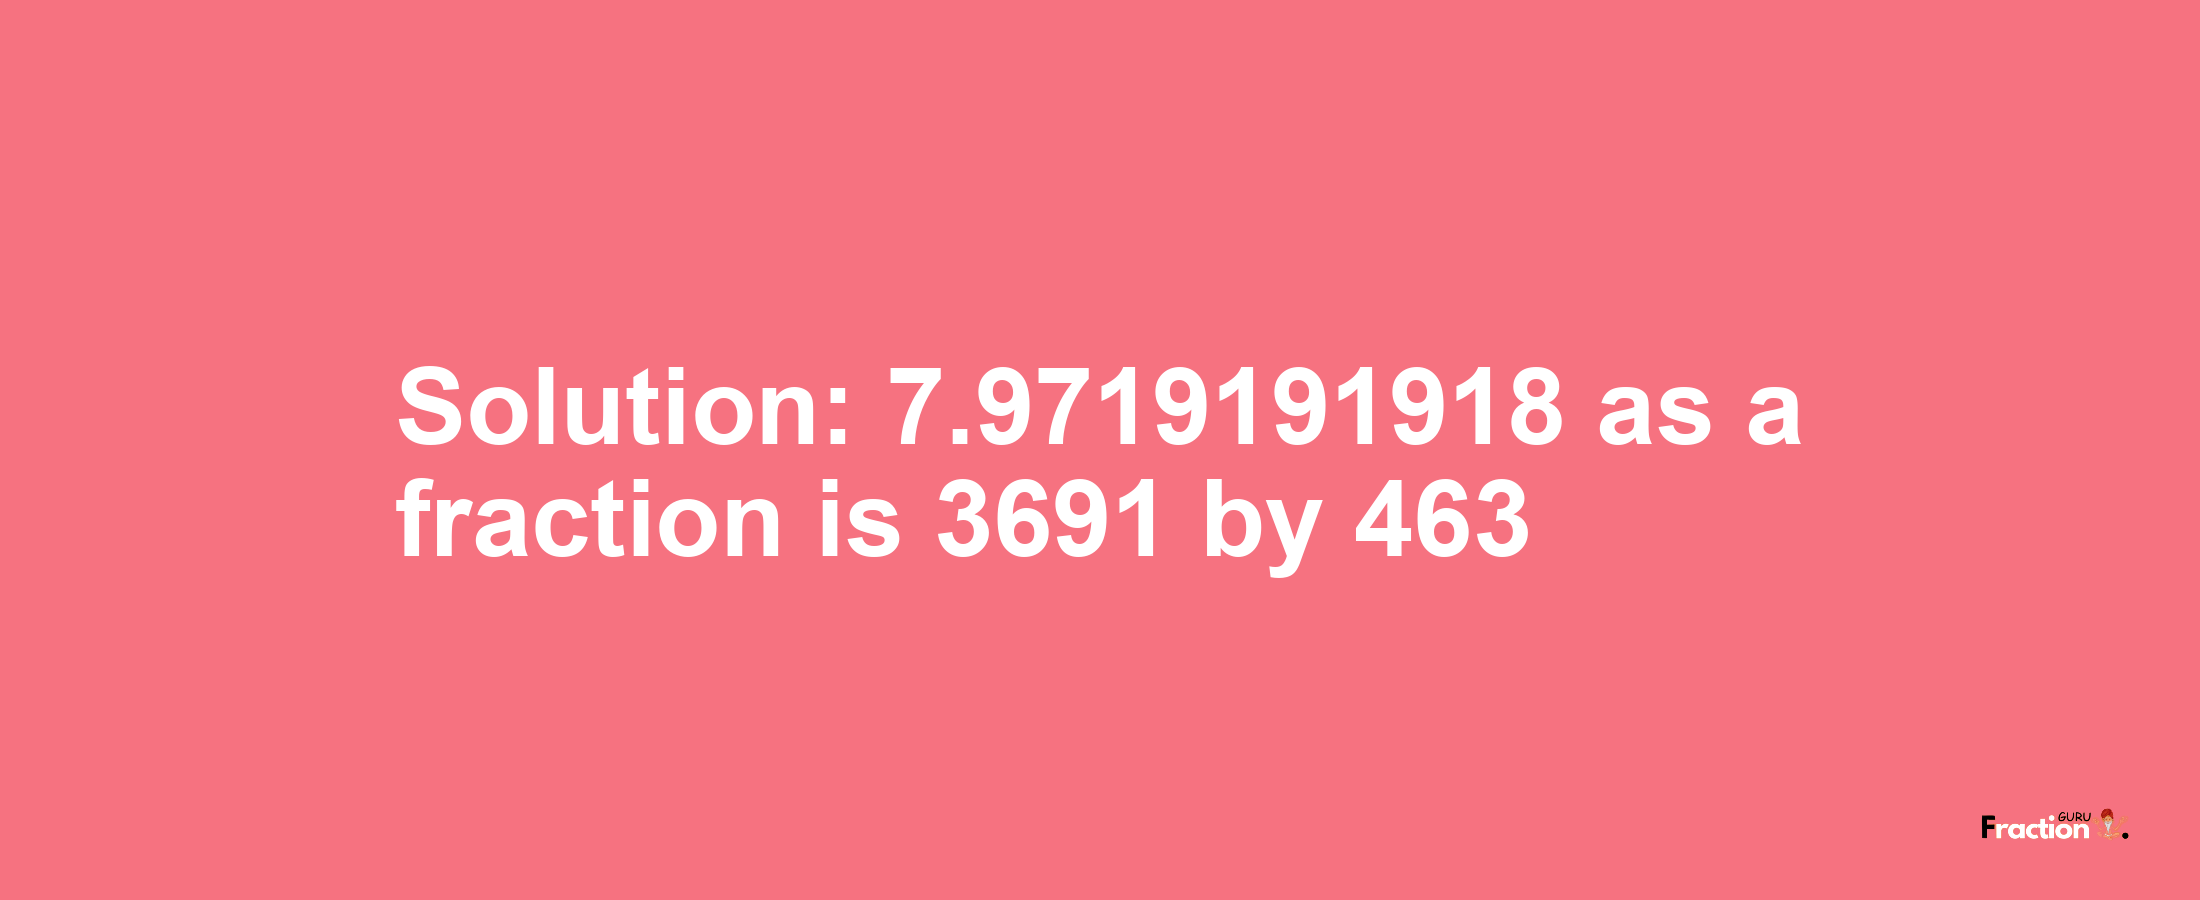 Solution:7.9719191918 as a fraction is 3691/463